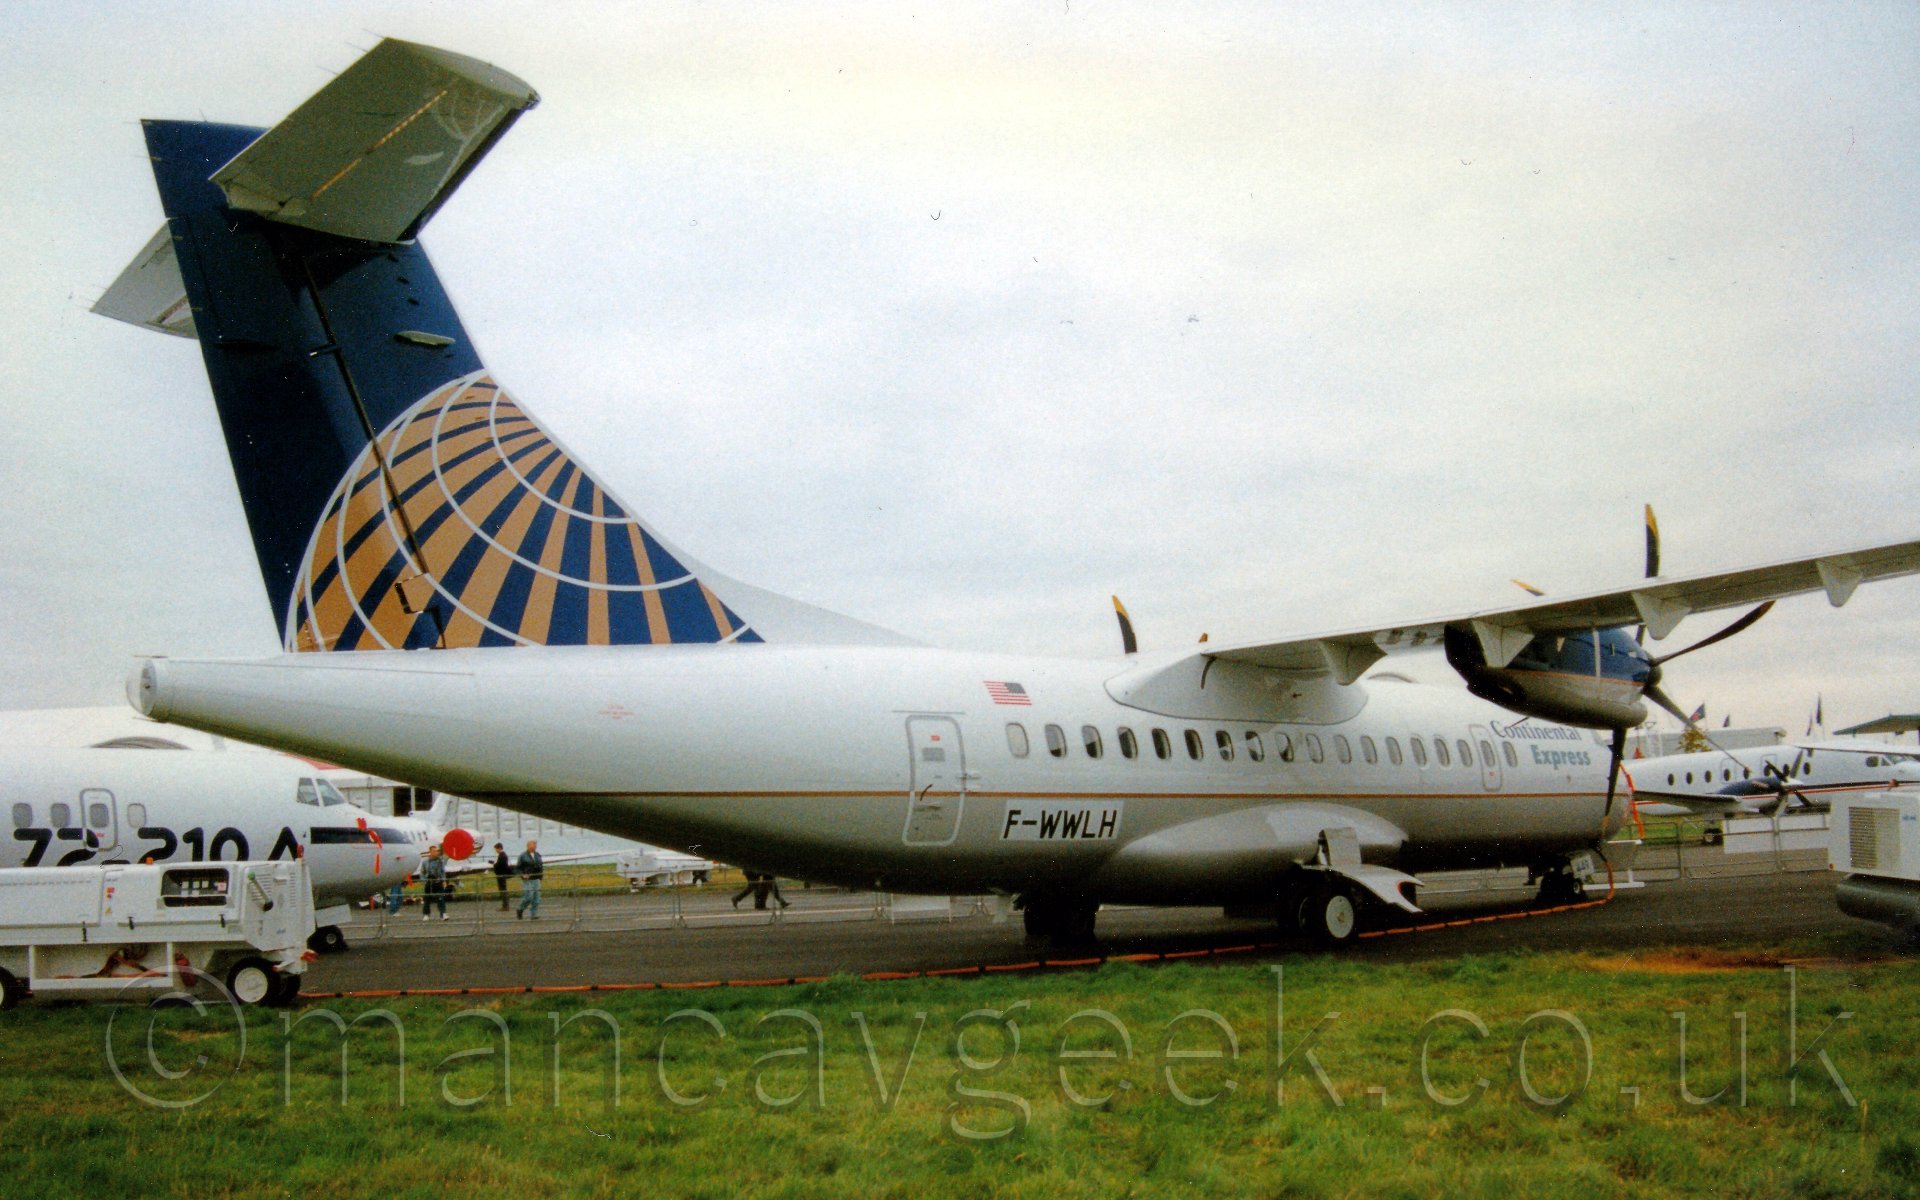 Side view of a high-winged, T-tailed twin propellor-engined airliner facing to the right and slightly away from the camera. The plane is mostly white, with a sandy brown belly, and a thin golden stripe, with blue "Continental Express". There is a white patch on the lower rear fuselage with the registration "F-WWLH". The tail is a deep blue, with a white and golden wireframe globe. Below the tail and behind the tail are other propellor airliners on static display, with occasional people walking around. Above it all, the sky is a flat grey.